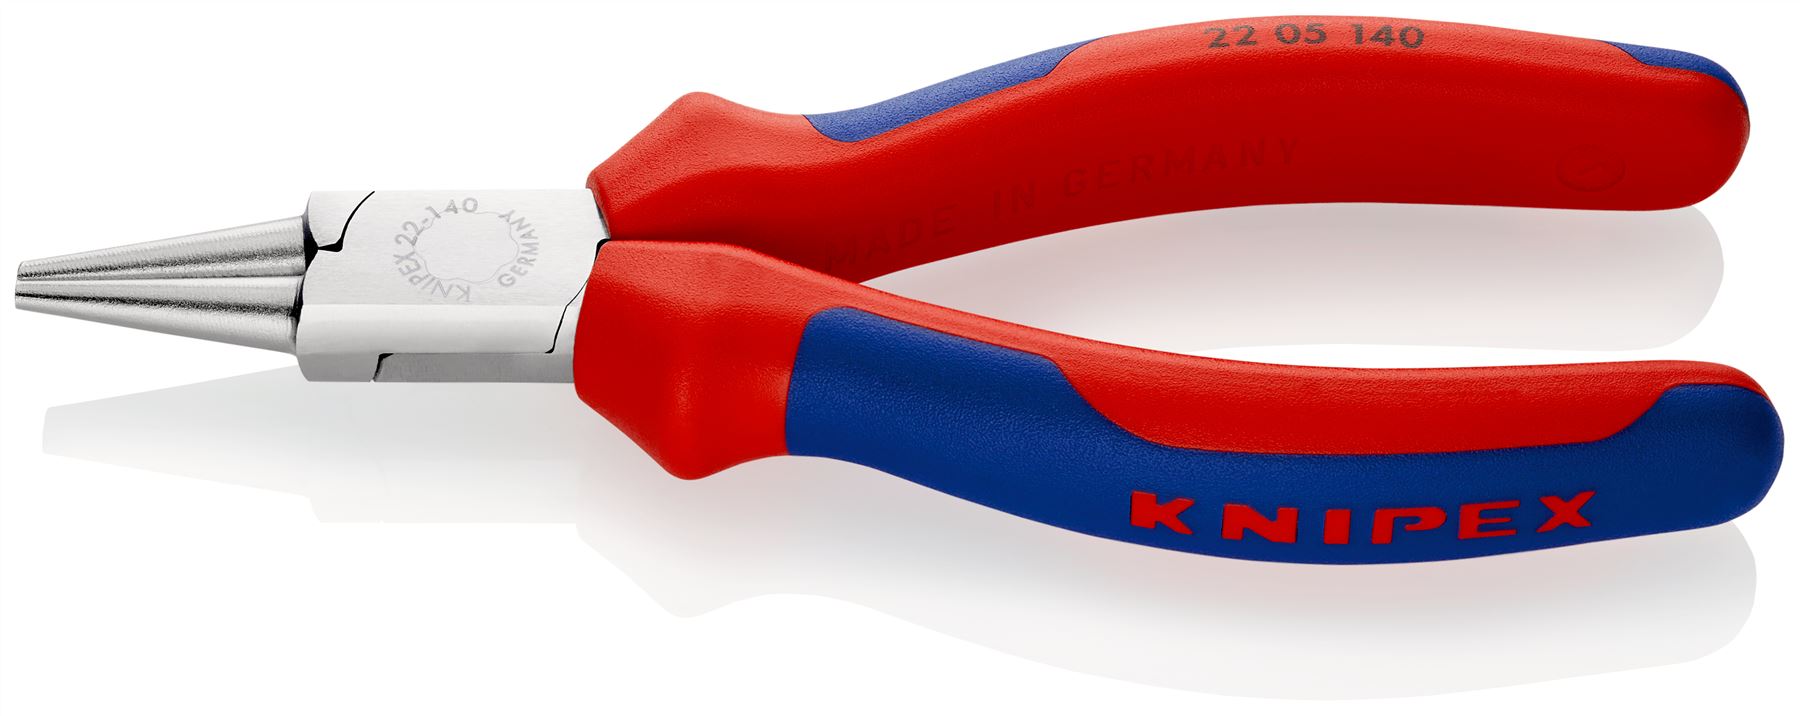 Knipex Round Nose Pliers 140mm Multi Component Grips 22 05 140